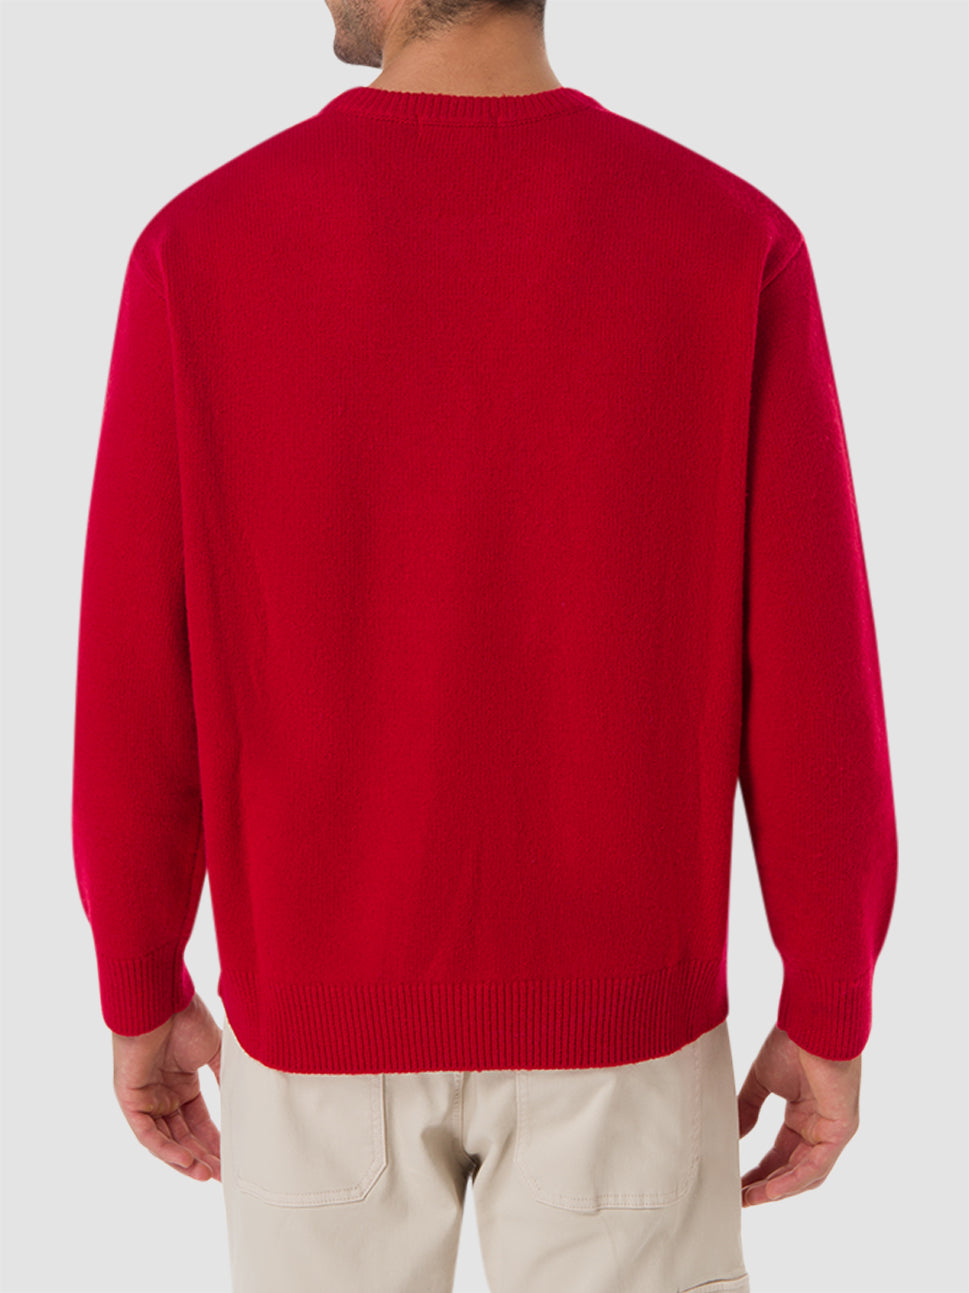 Supreme Doughboy Sweater Red